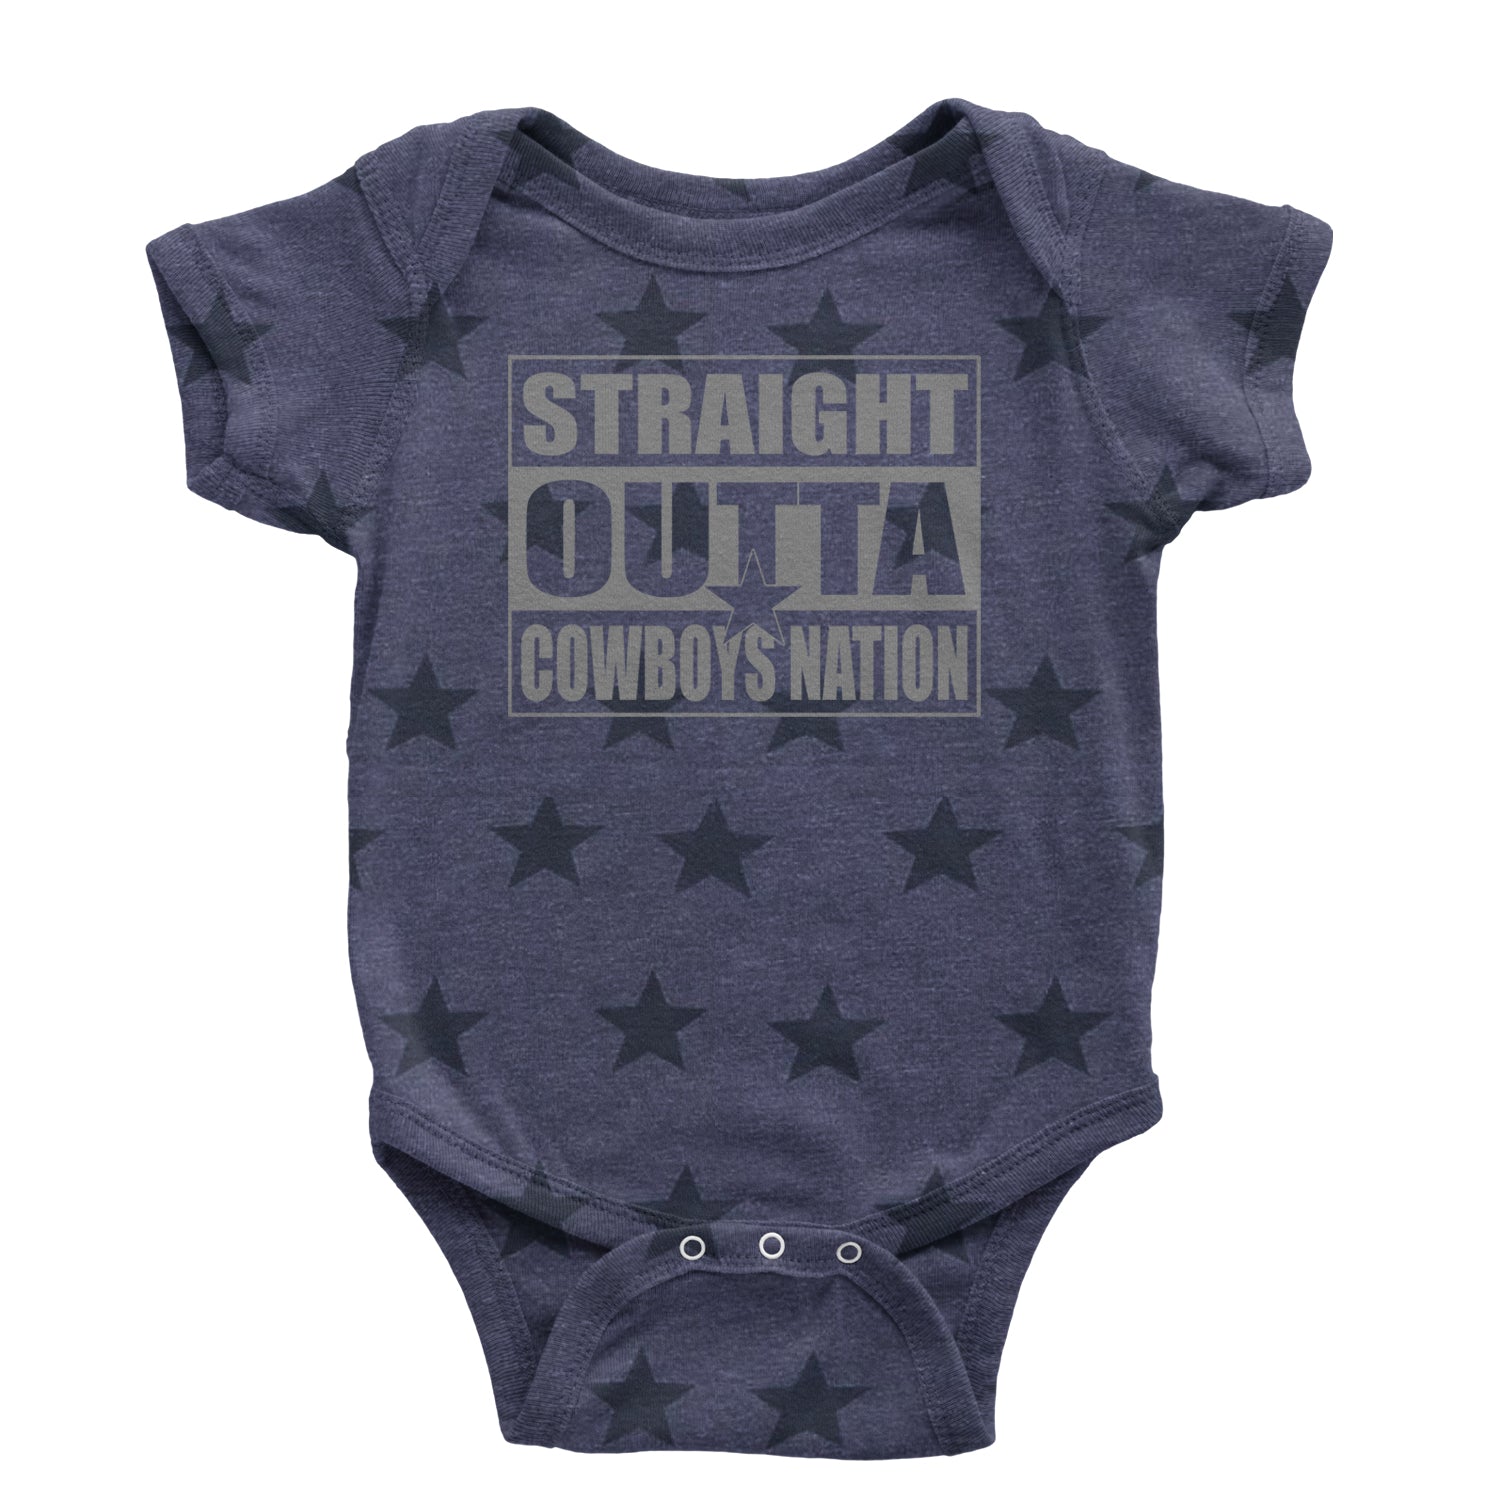 Straight Outta Cowboys Nation   Infant One-Piece Romper Bodysuit and Toddler T-shirt